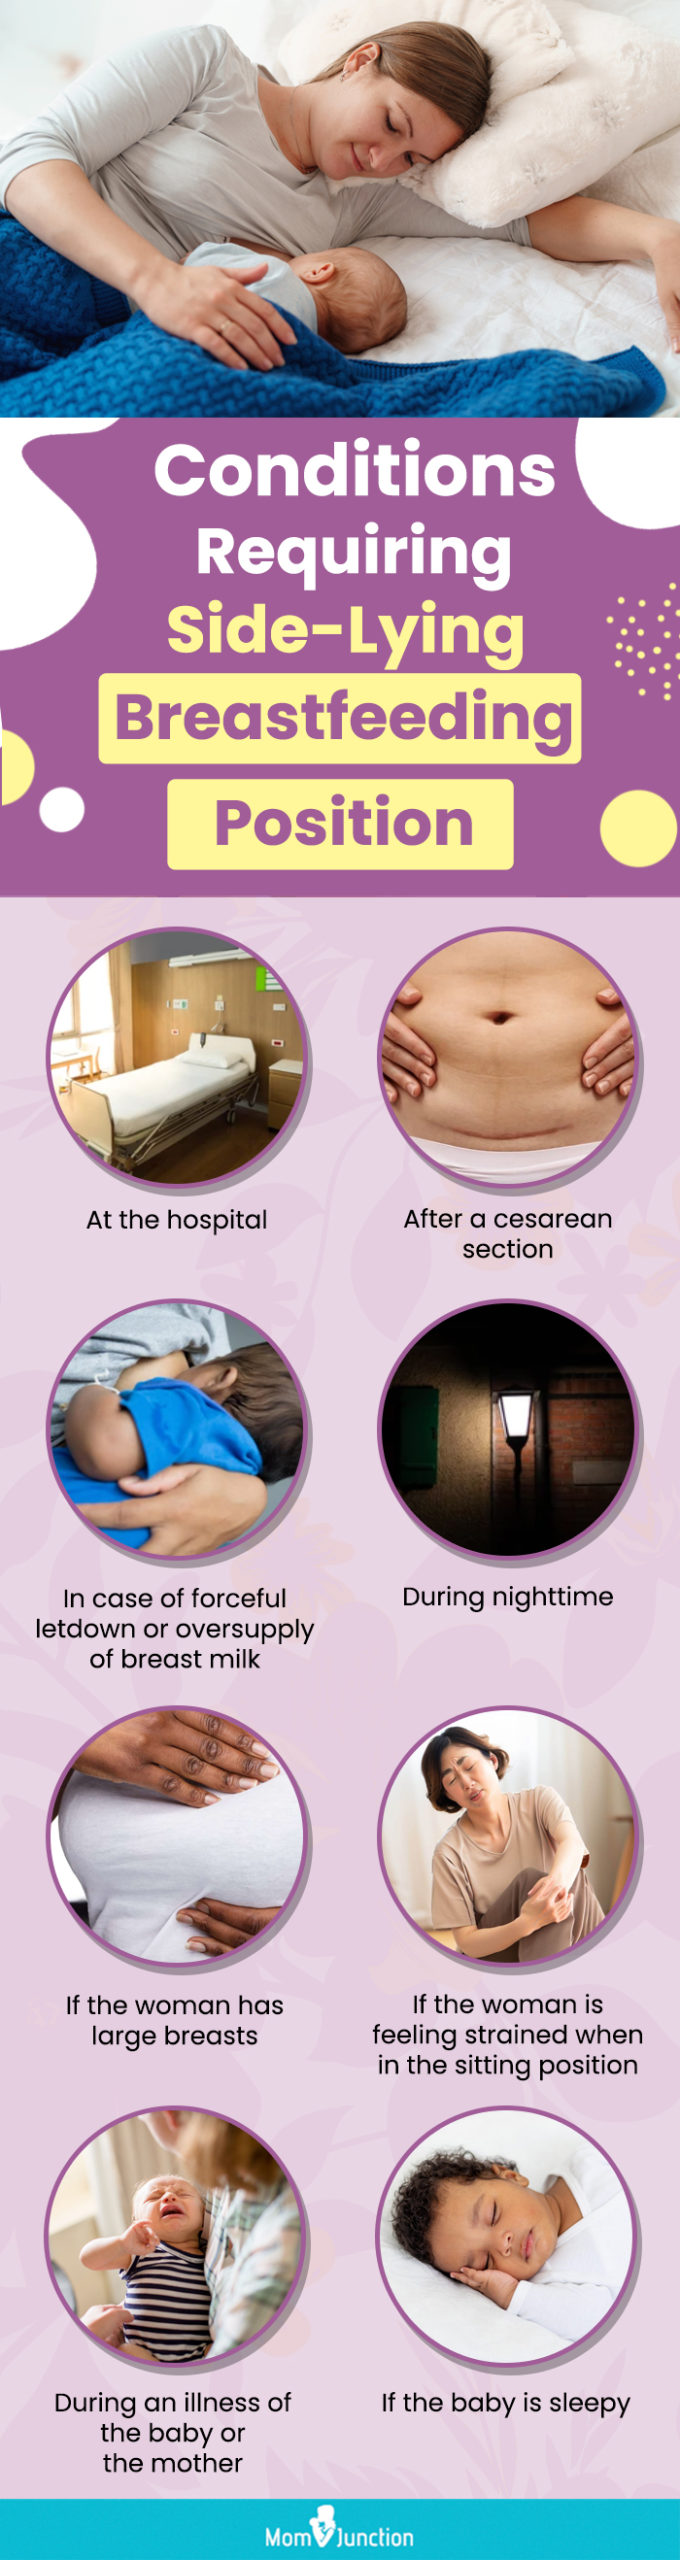 conditions requiring side lying breastfeeding position (infographic)